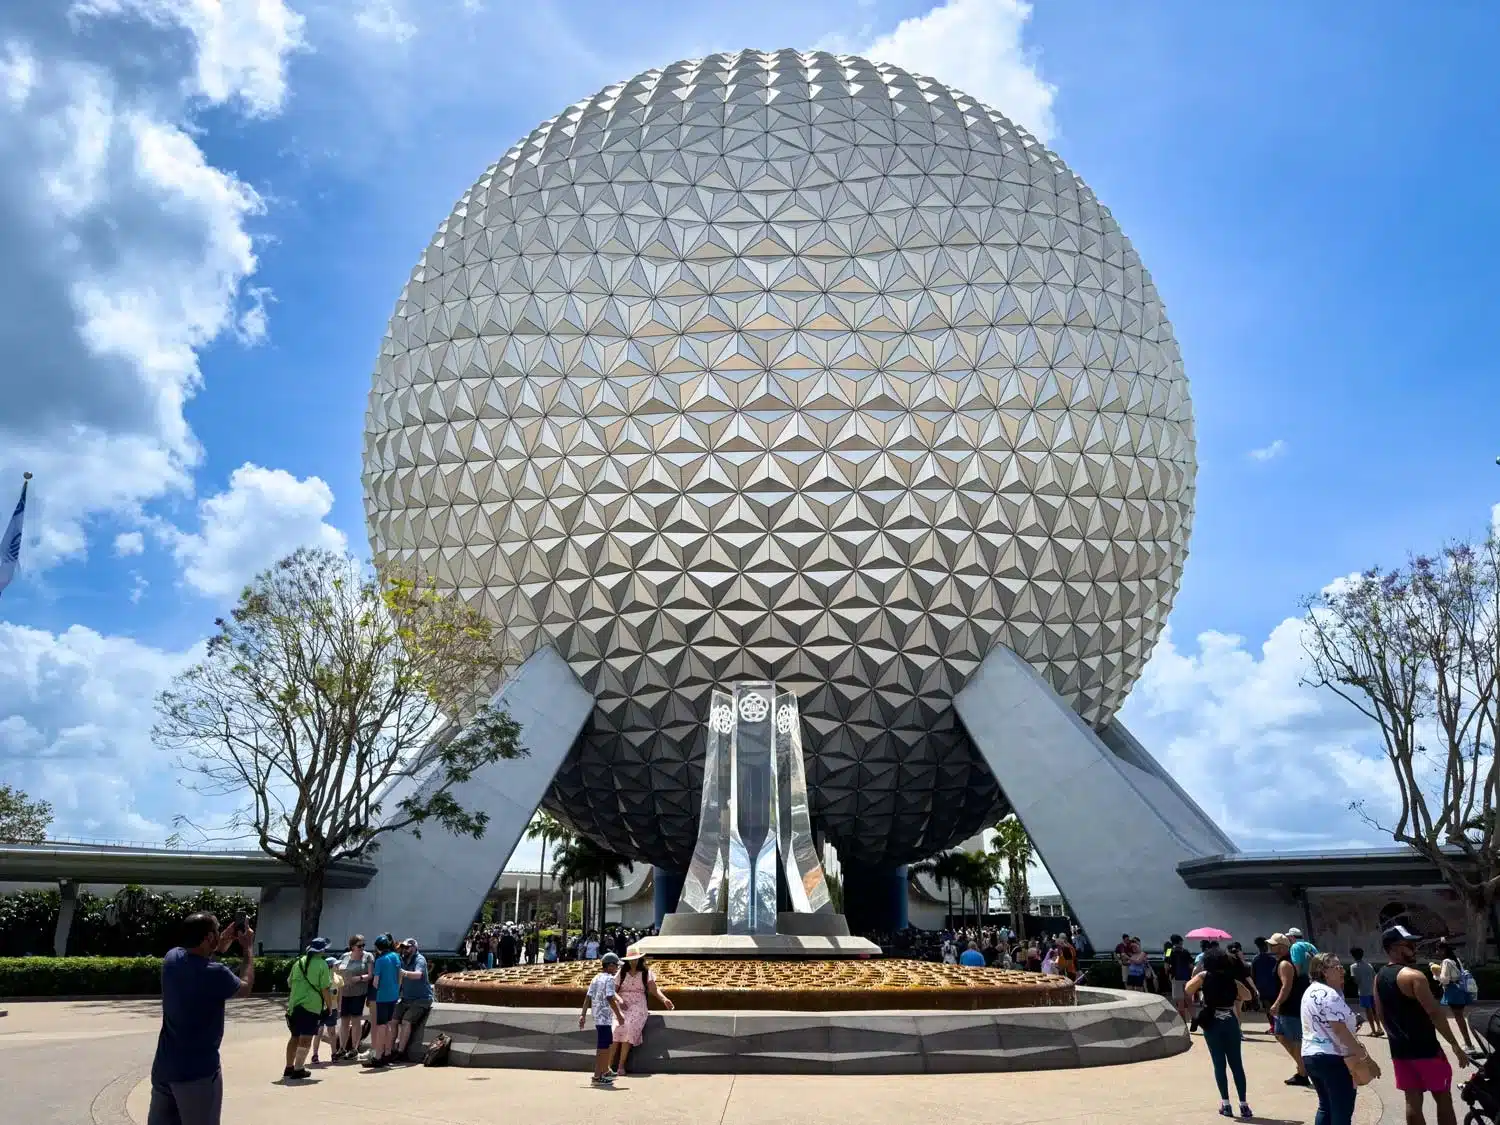 Spaceship Earth at EPCOT on a bright day with a blue sky